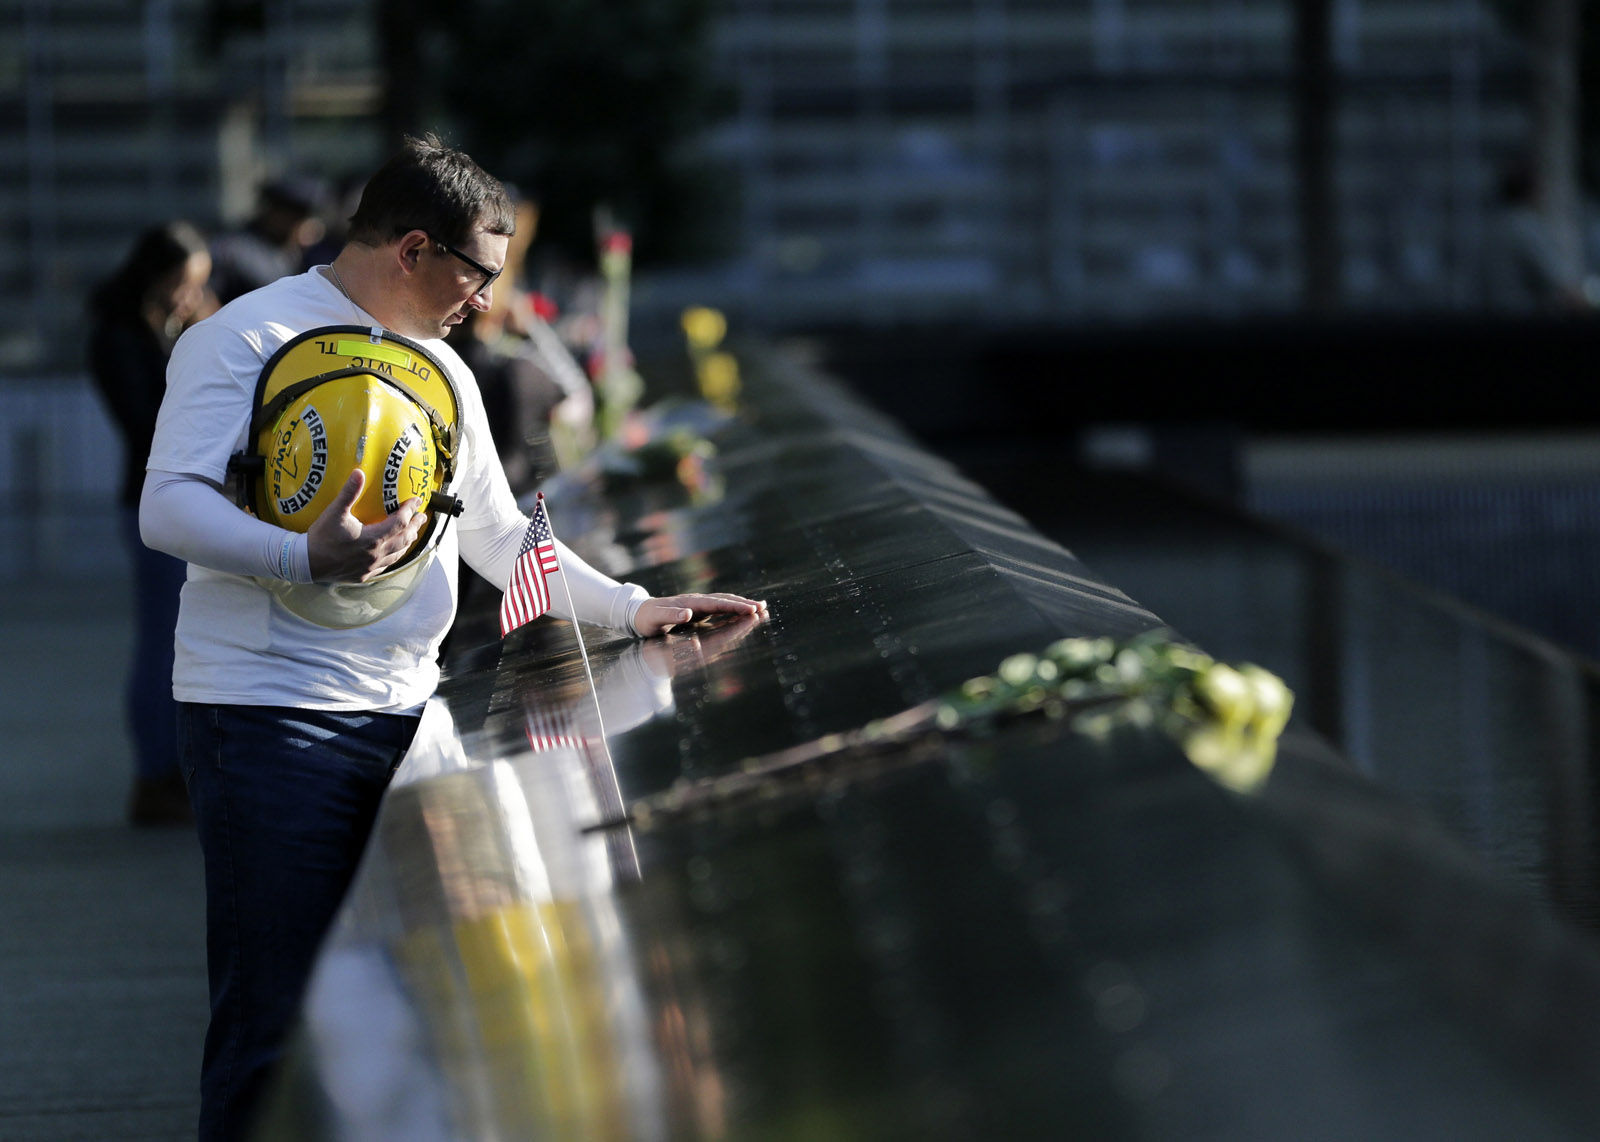 James Taormina, whose brother Dennis Taormina was killed during the Sept. 11 attacks stands by the side of the north waterfall pool before the a ceremony at ground zero in New York, Monday, Sept. 11, 2017. Holding photos and reading names of loved ones lost 16 years ago, 9/11 victims' relatives marked the anniversary of the attacks with a solemn and personal ceremony. (AP Photo/Seth Wenig)